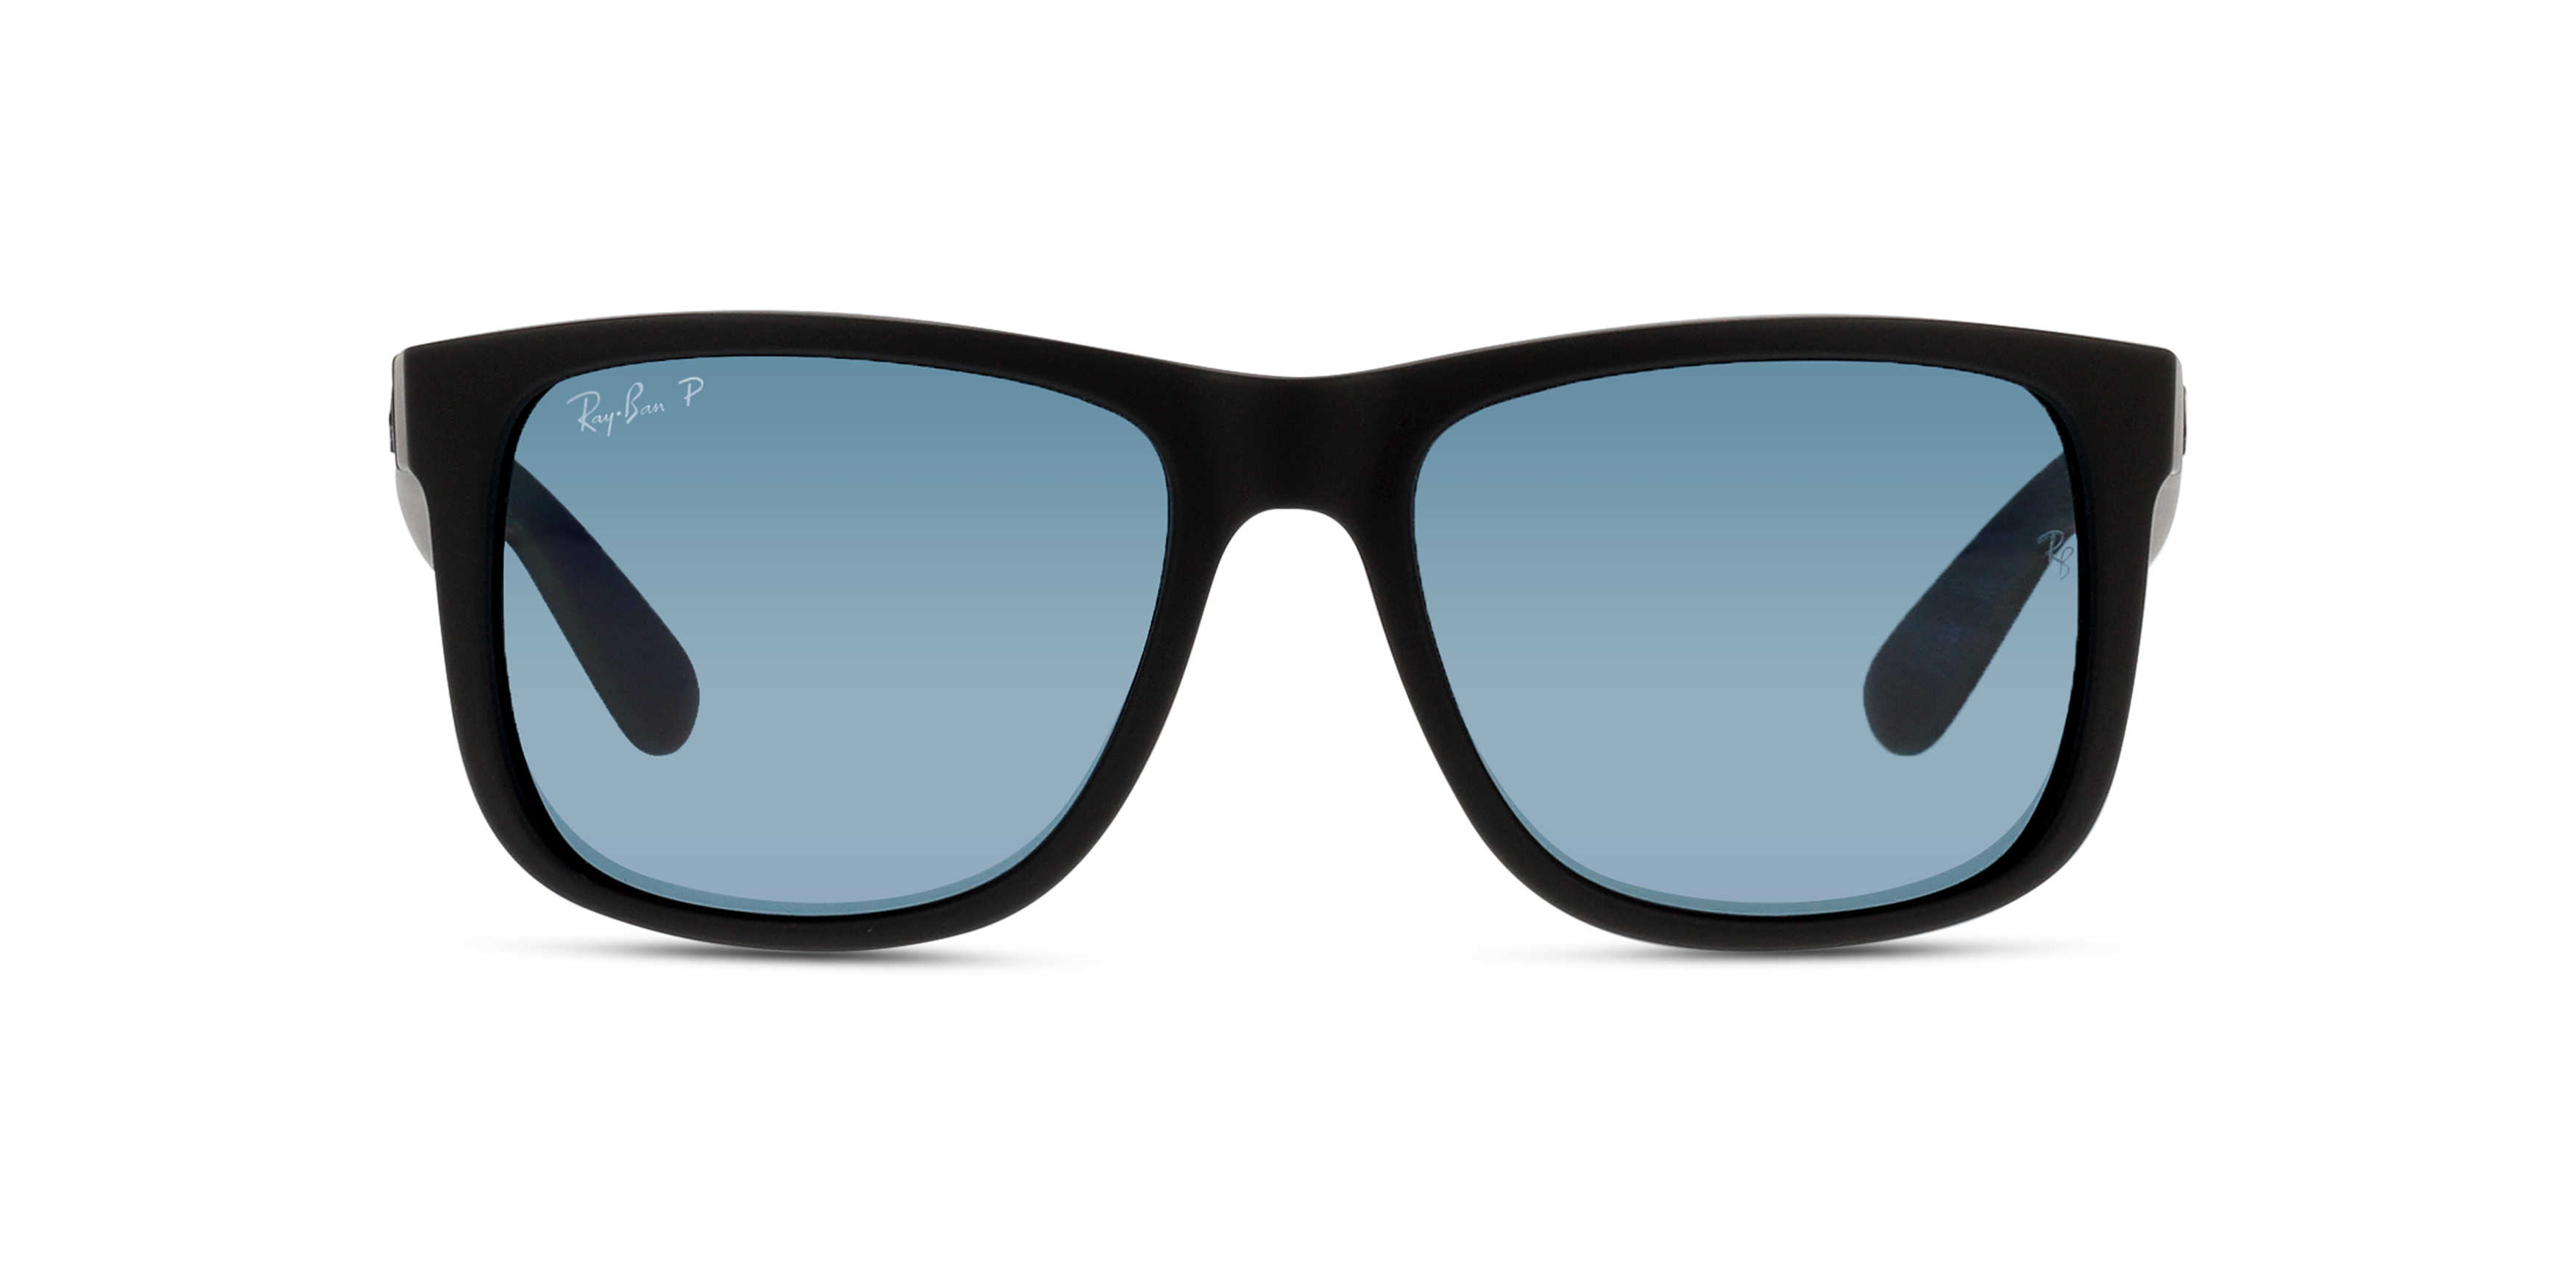 [products.image.front] RAY-BAN RB4165 622/2V